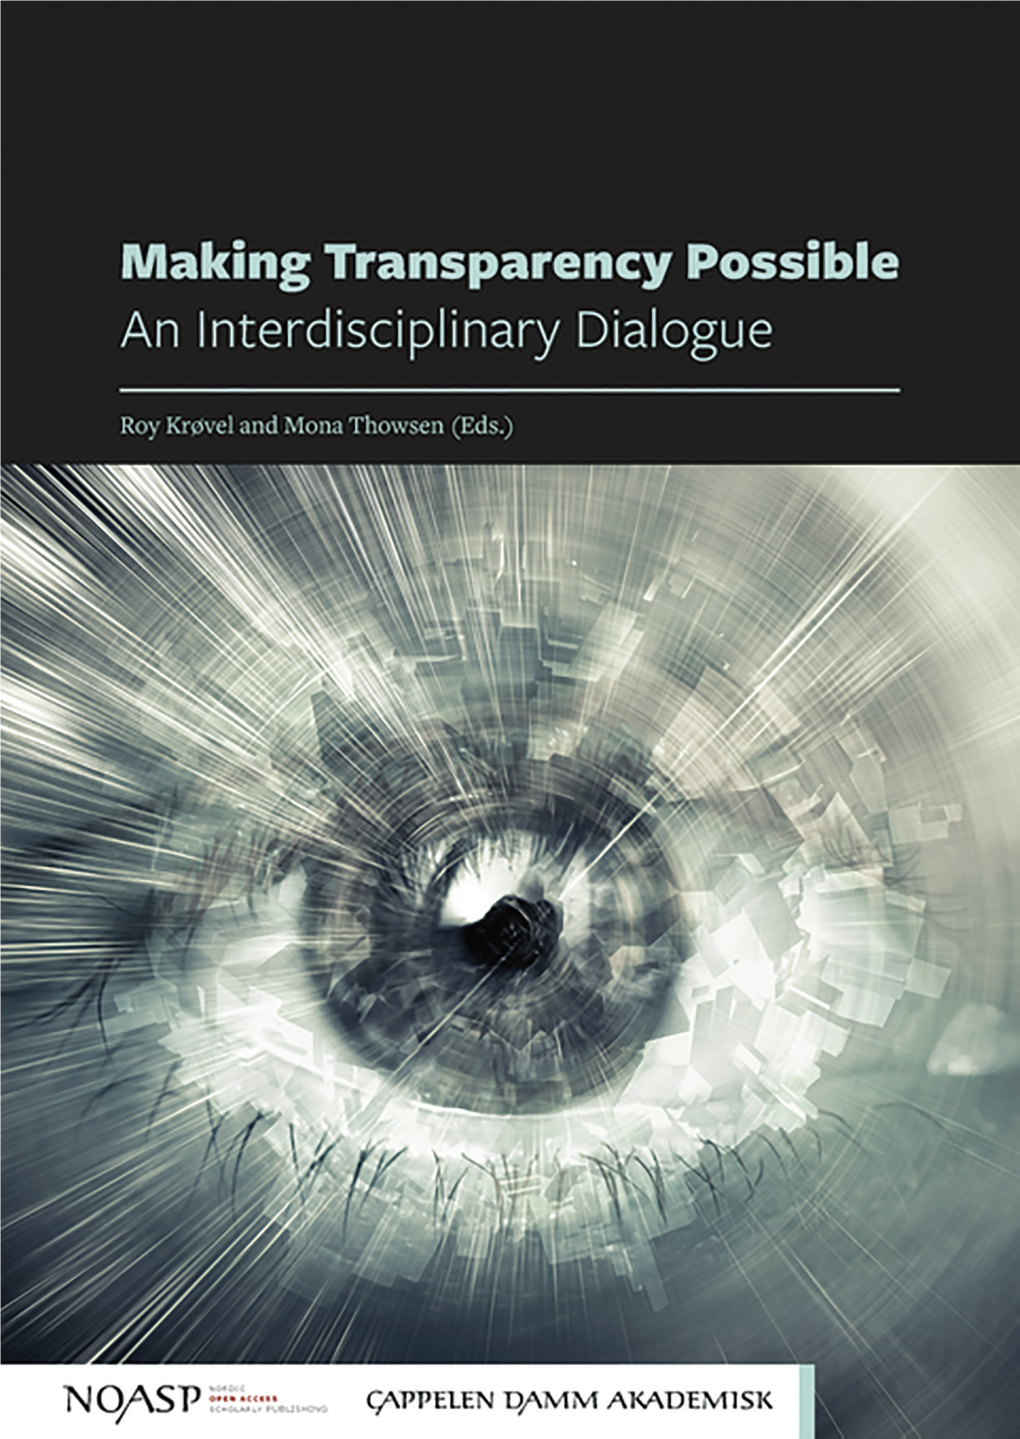 Making Transparency Possible